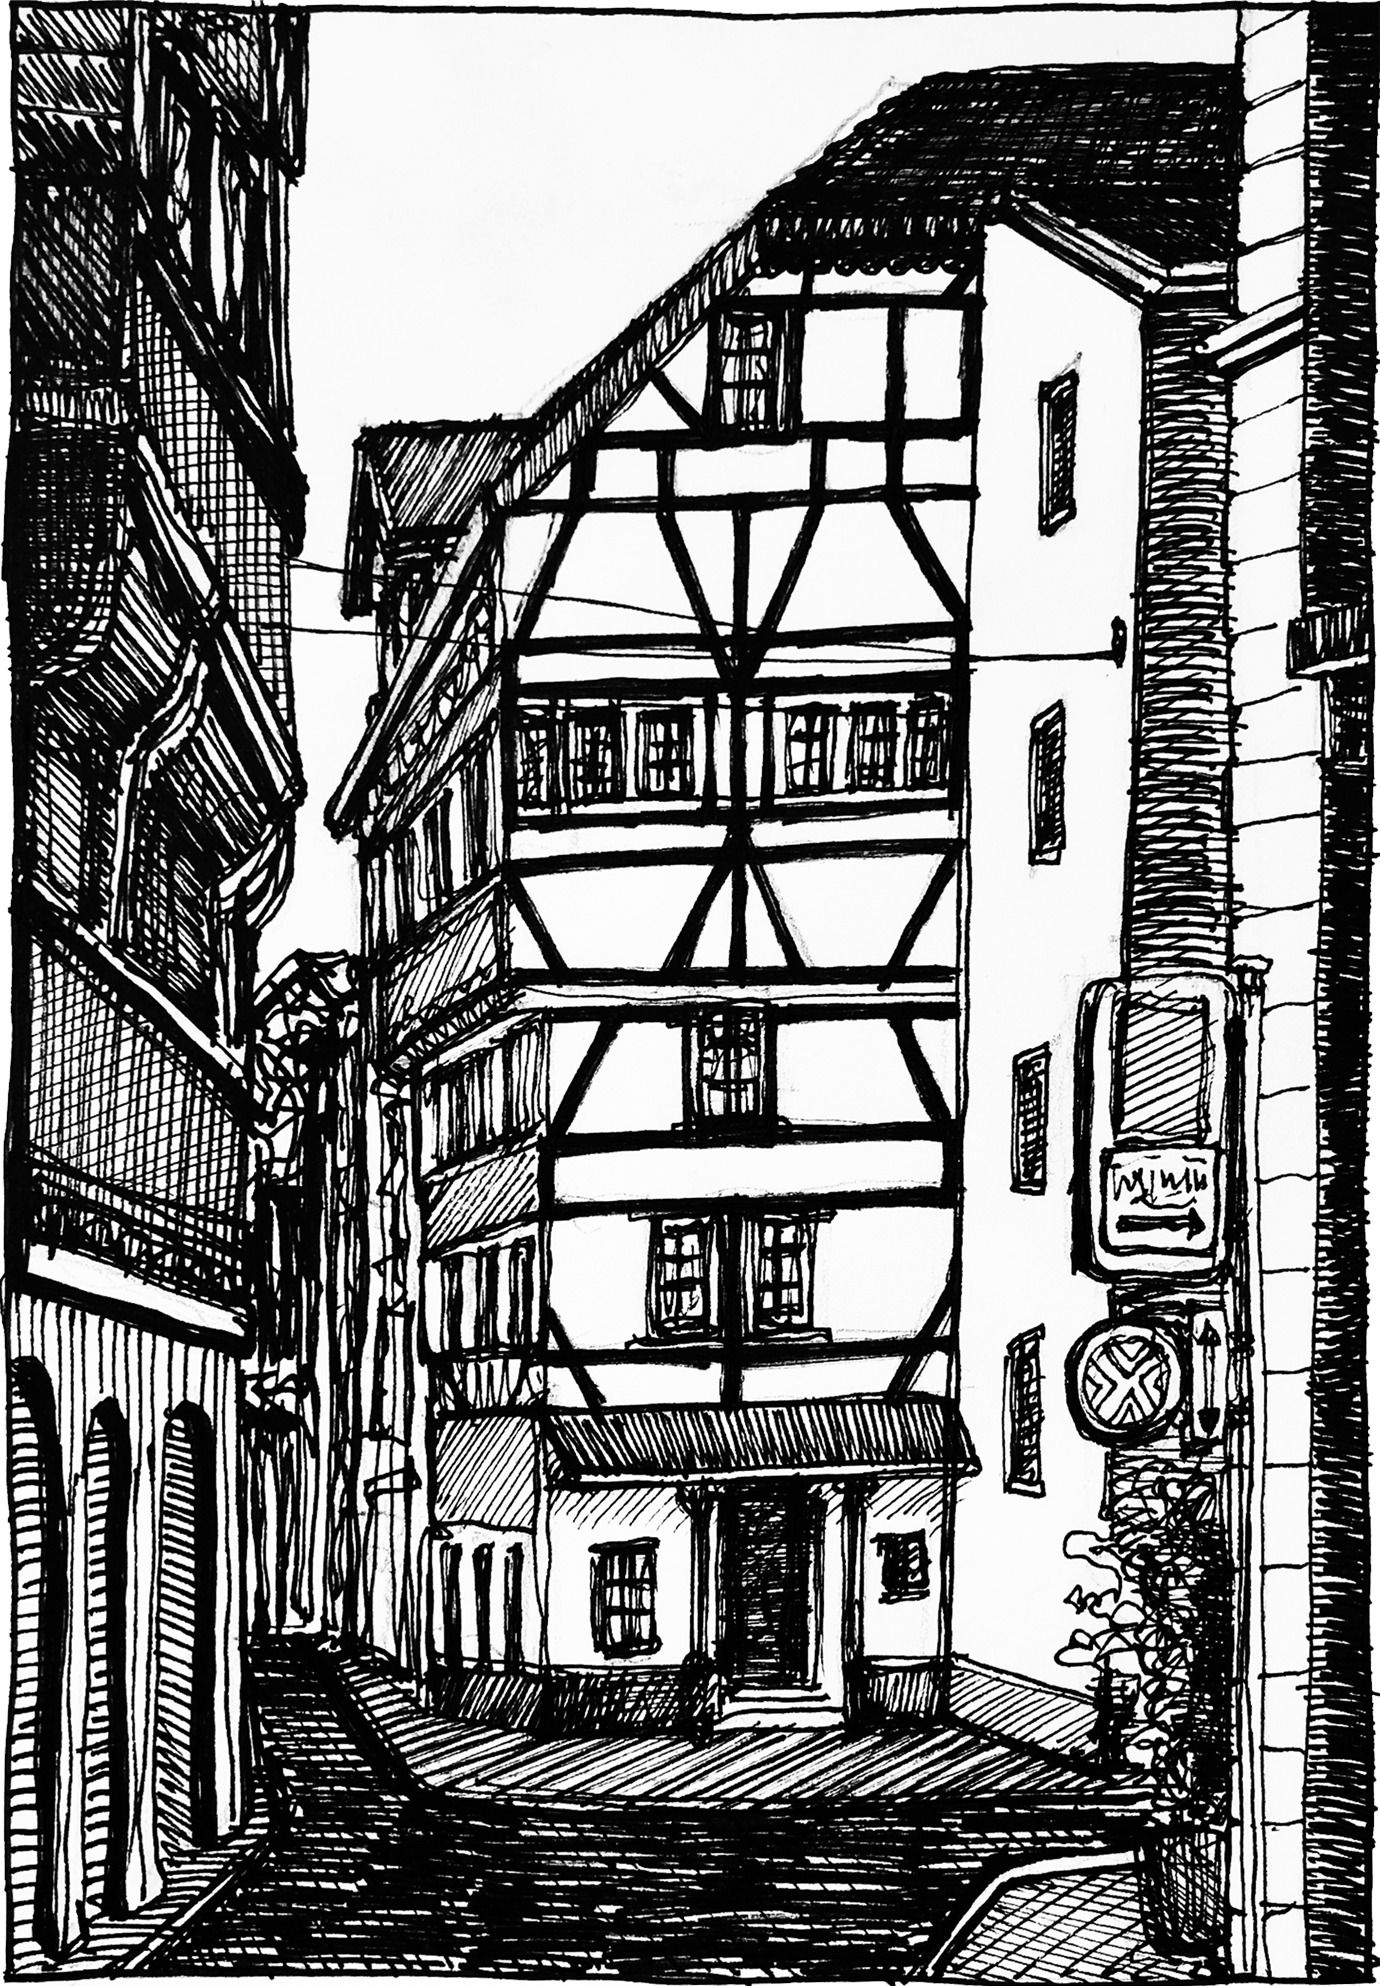 Webergasse 30 - Drawing by Camillo Visini